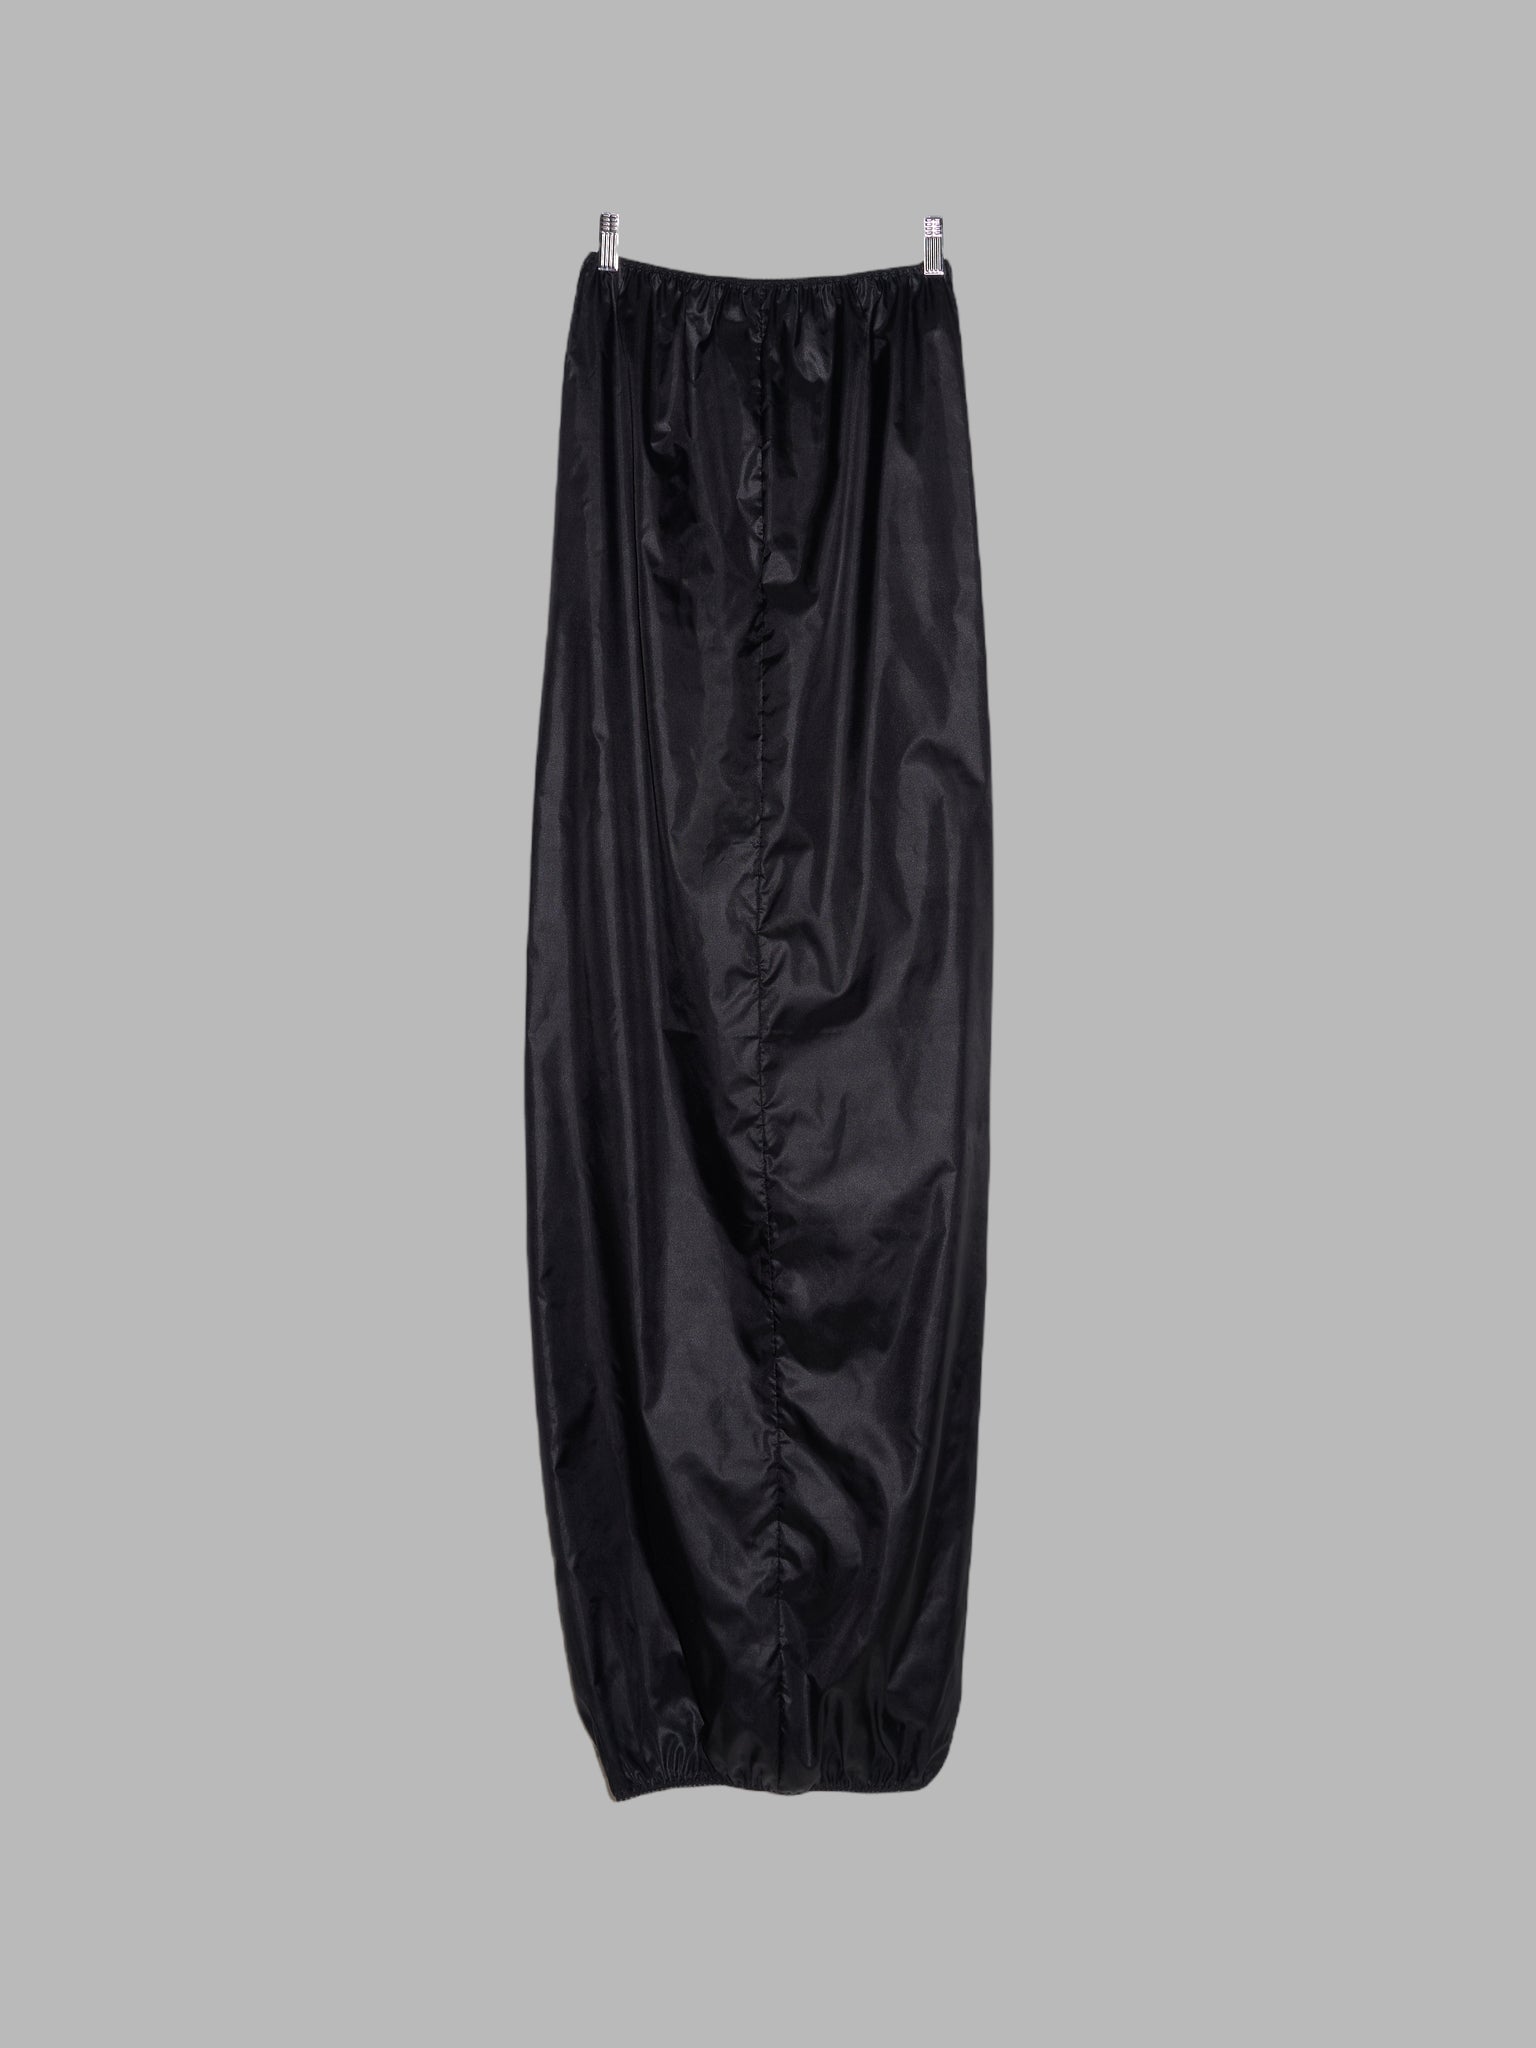 Jean Colonna sheeny black tube dress or double-layered skirt - size 40